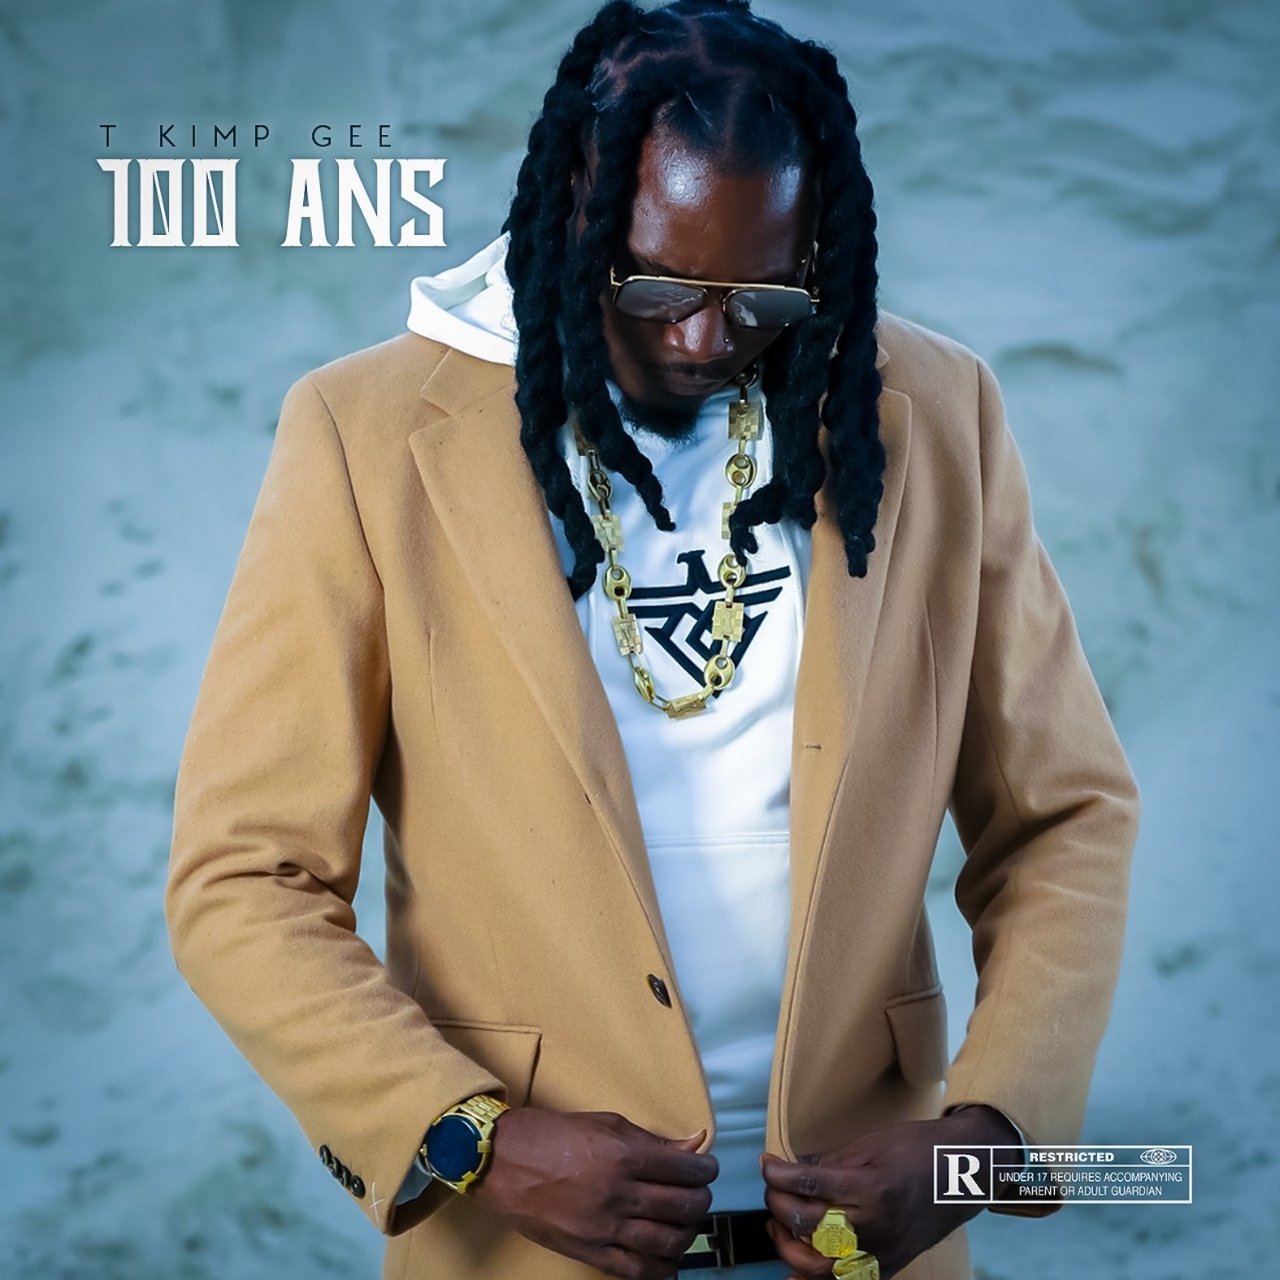 T Kimp Gee - 100 Ans (Cover)